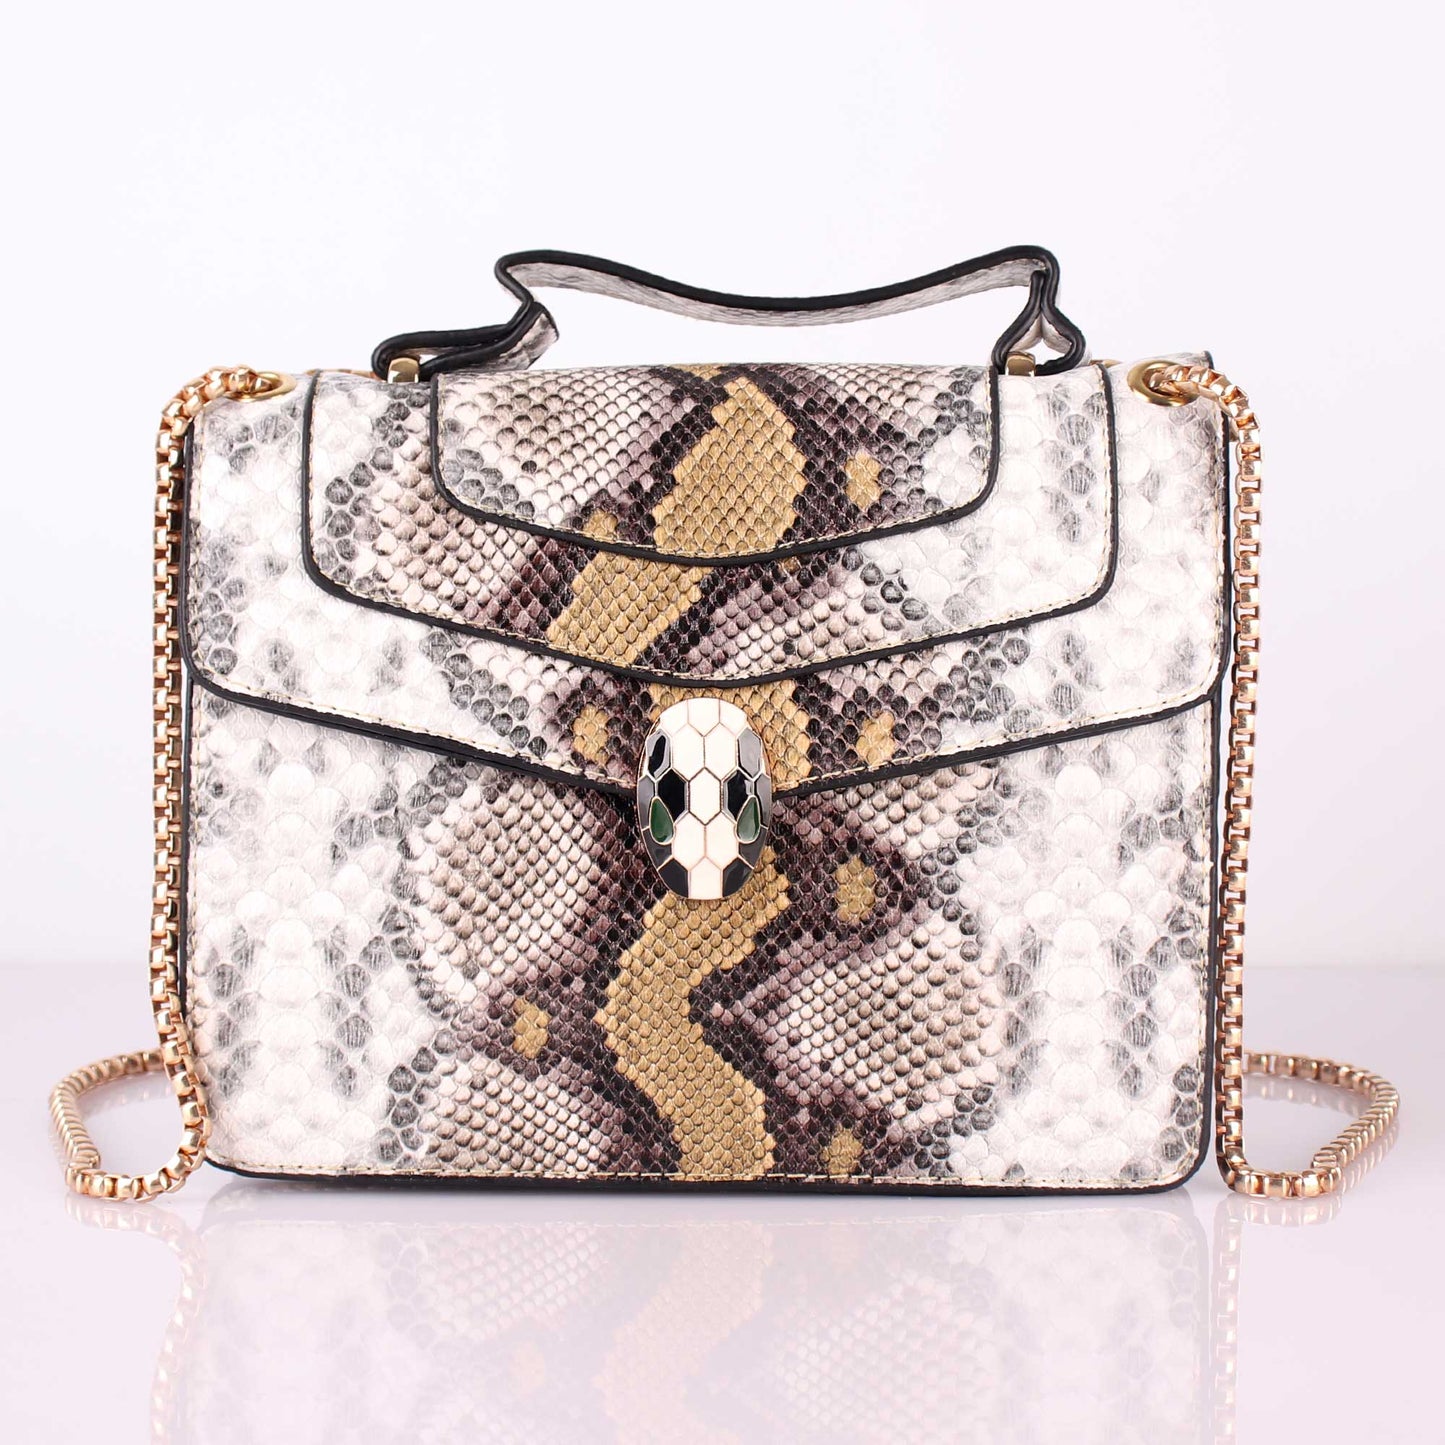 The Exotic Print Sling Bag in Shades of Yellow